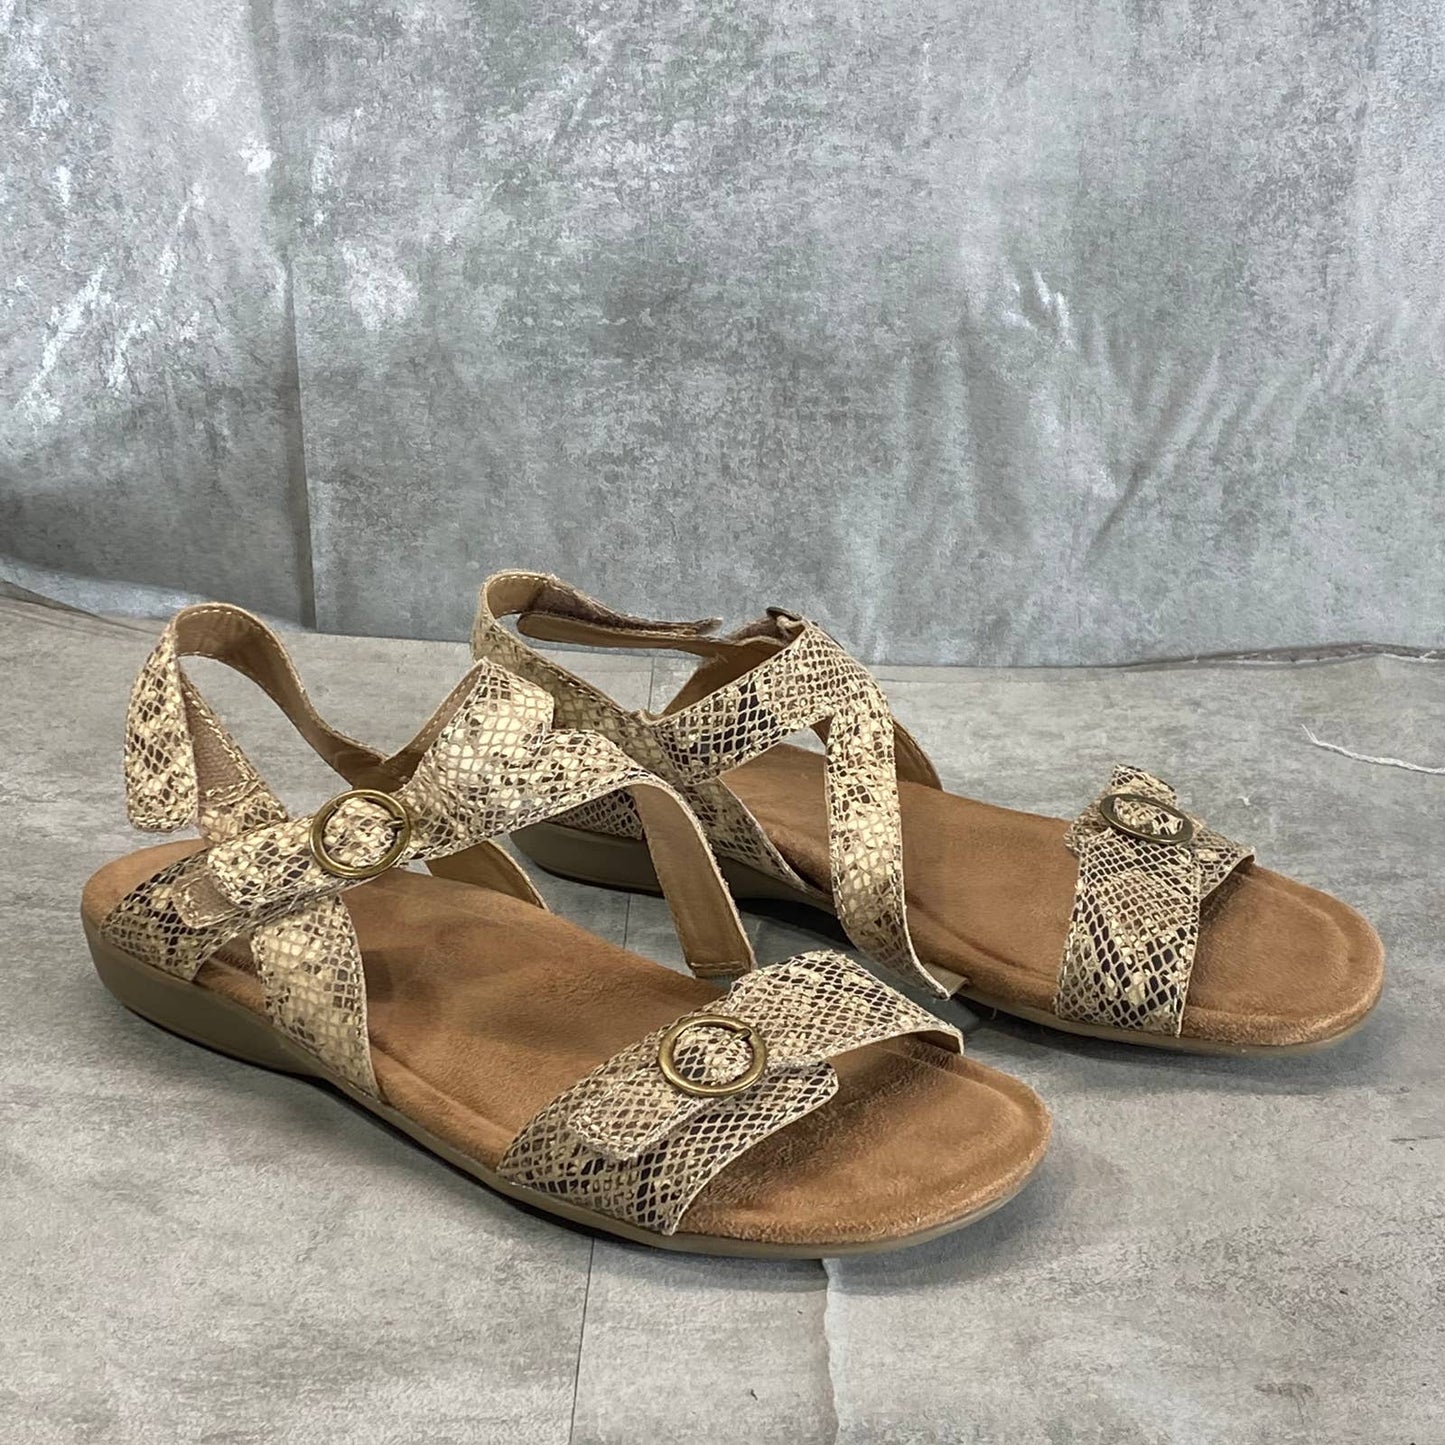 EARTH ORIGINS Women's Taupe Multi Snake Embossed Beck Casual Sandals SZ 11